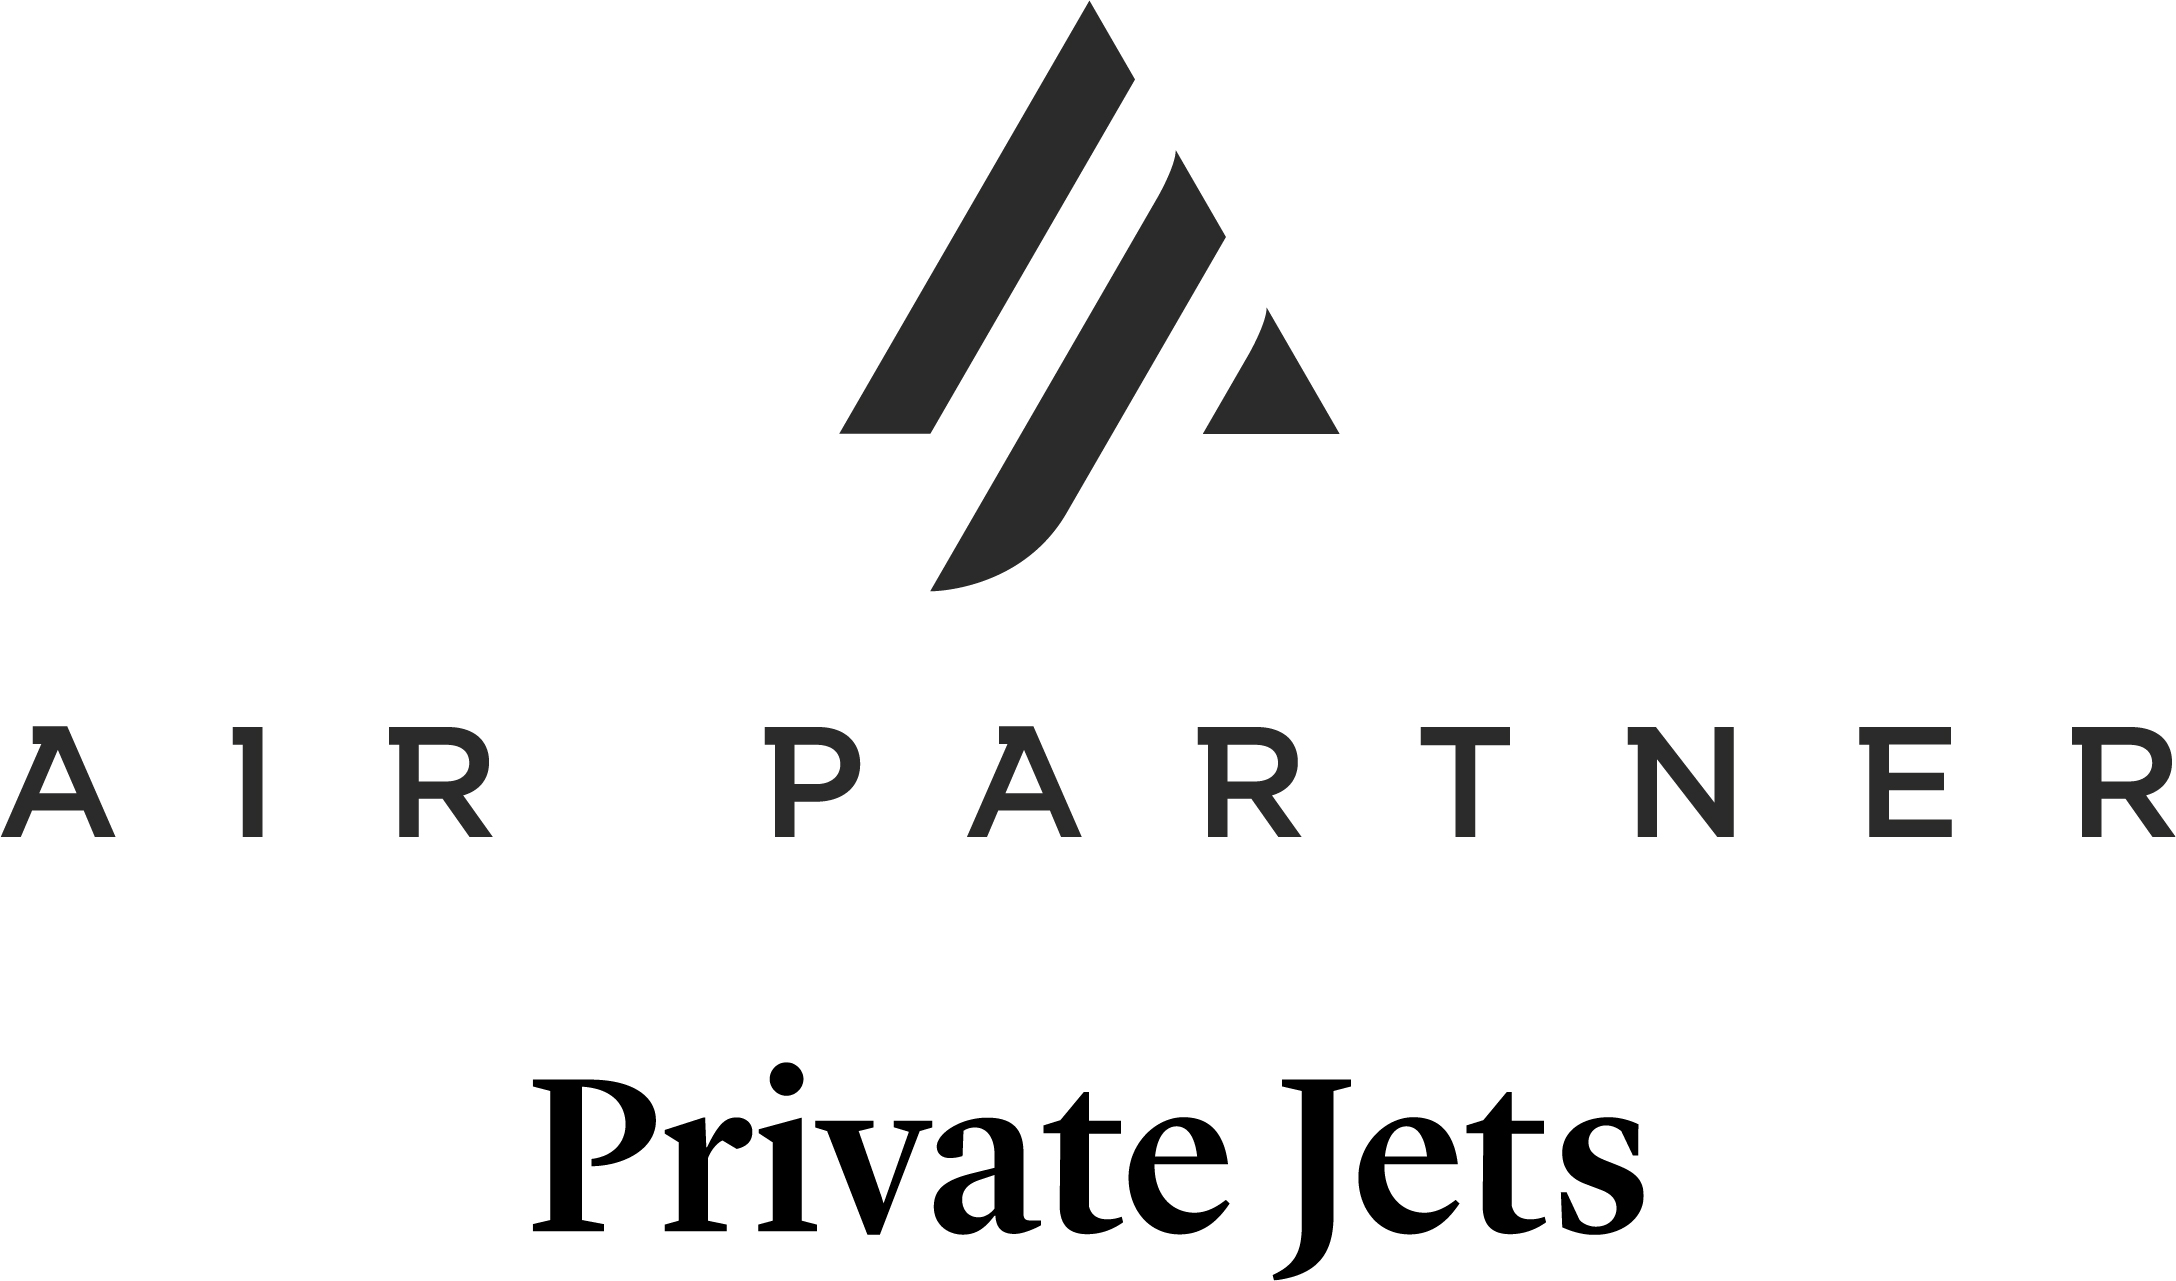 Air Partner Private Jets